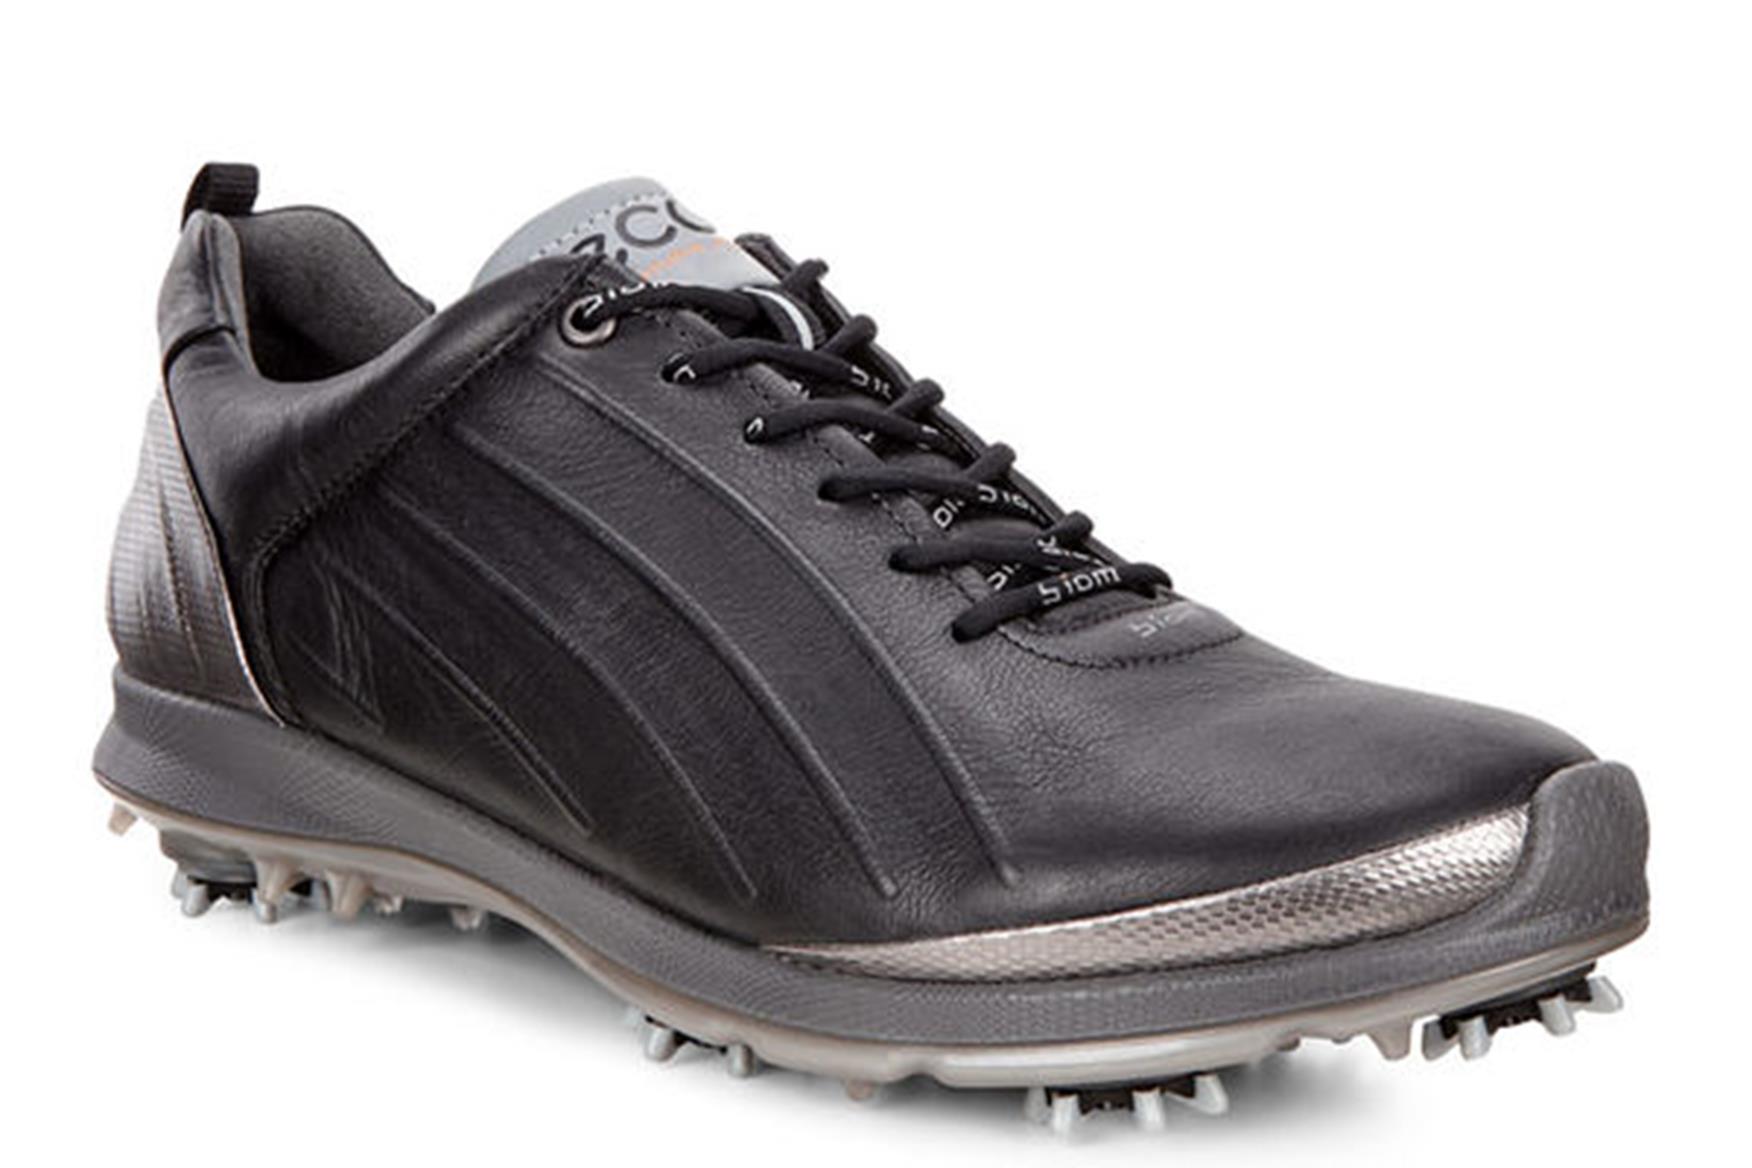 ecco golf shoes review 2017